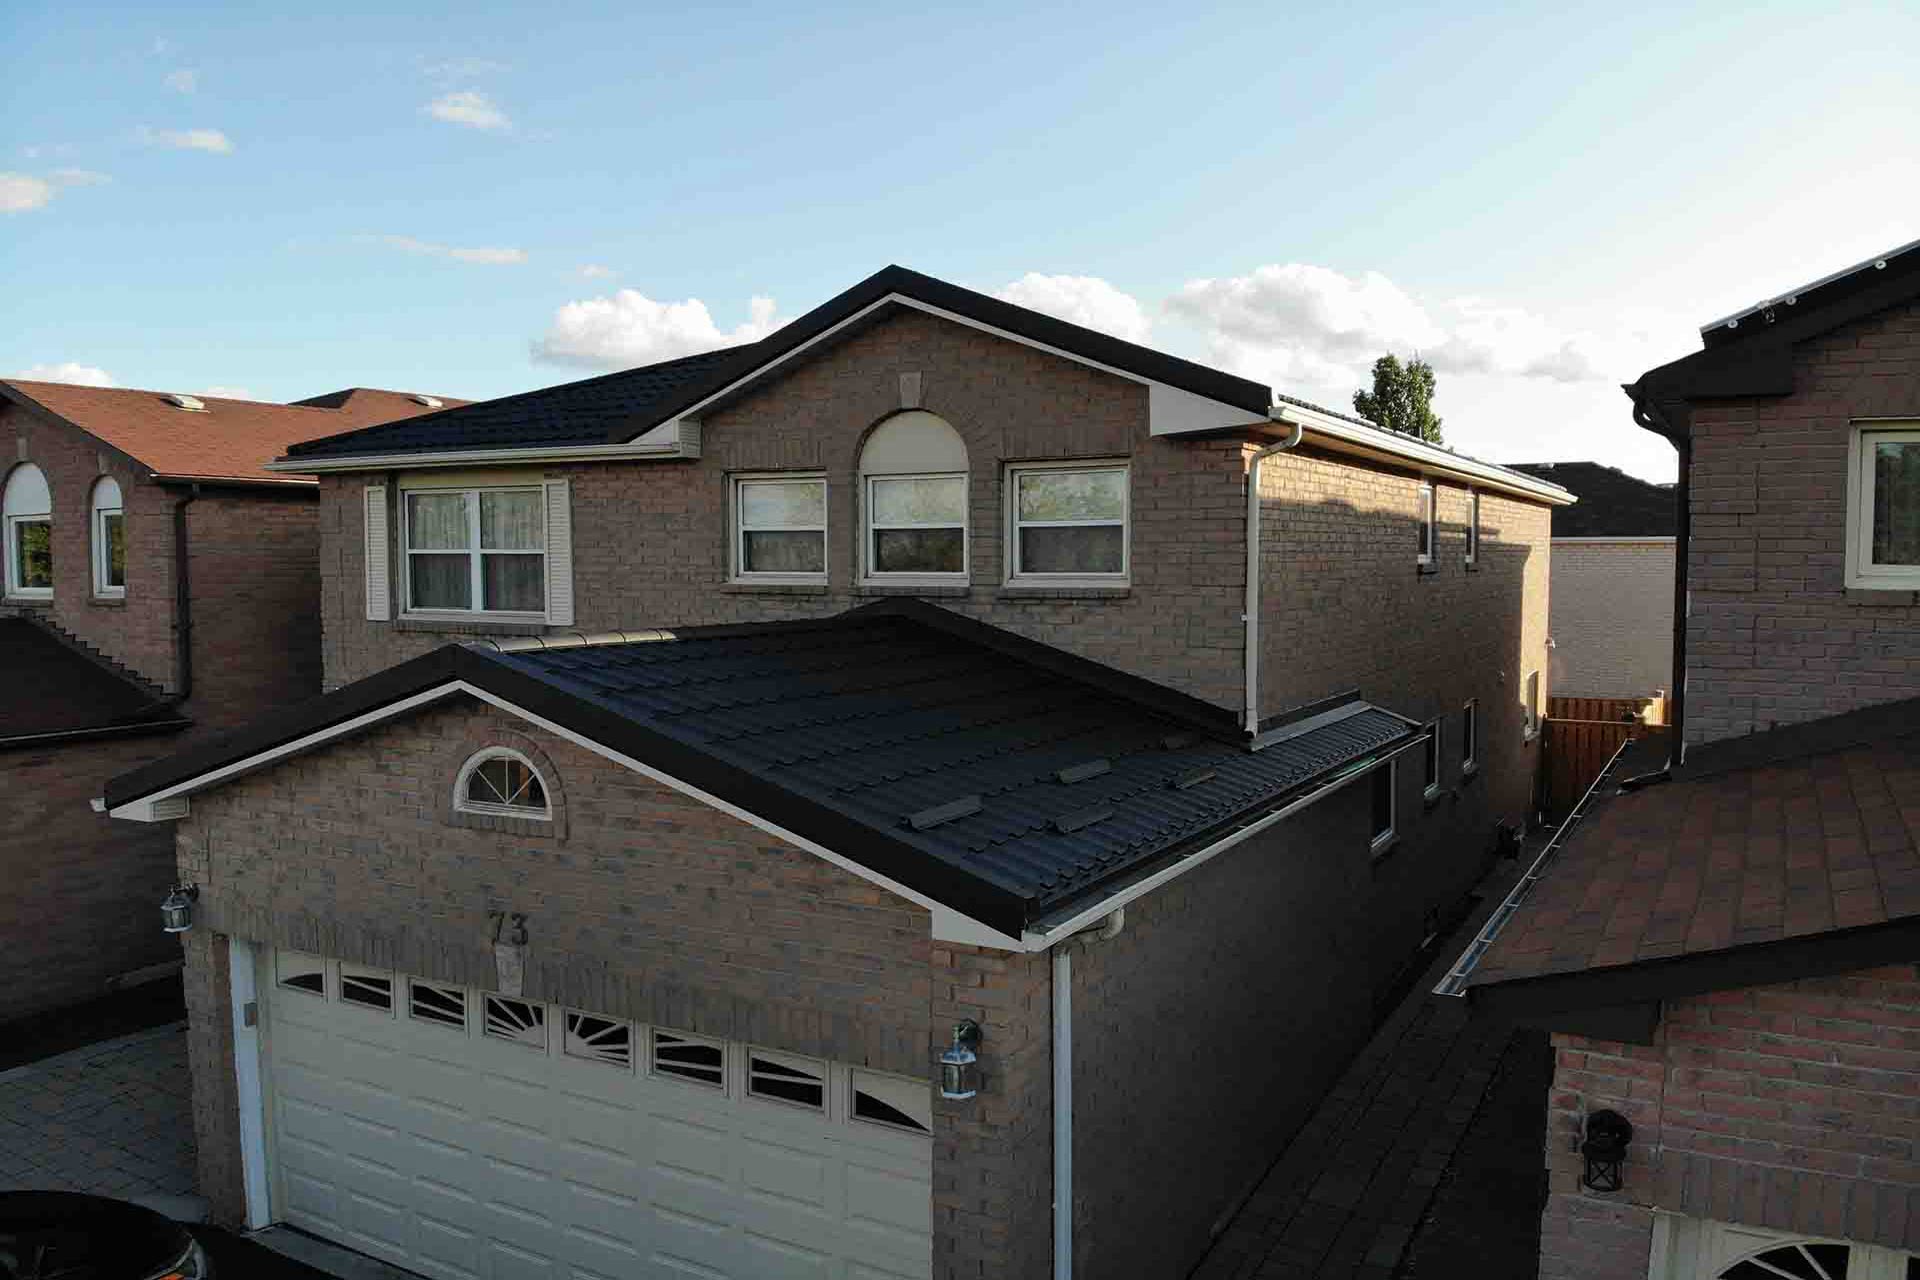 How Do You Know If Your Roof Is Damaged?